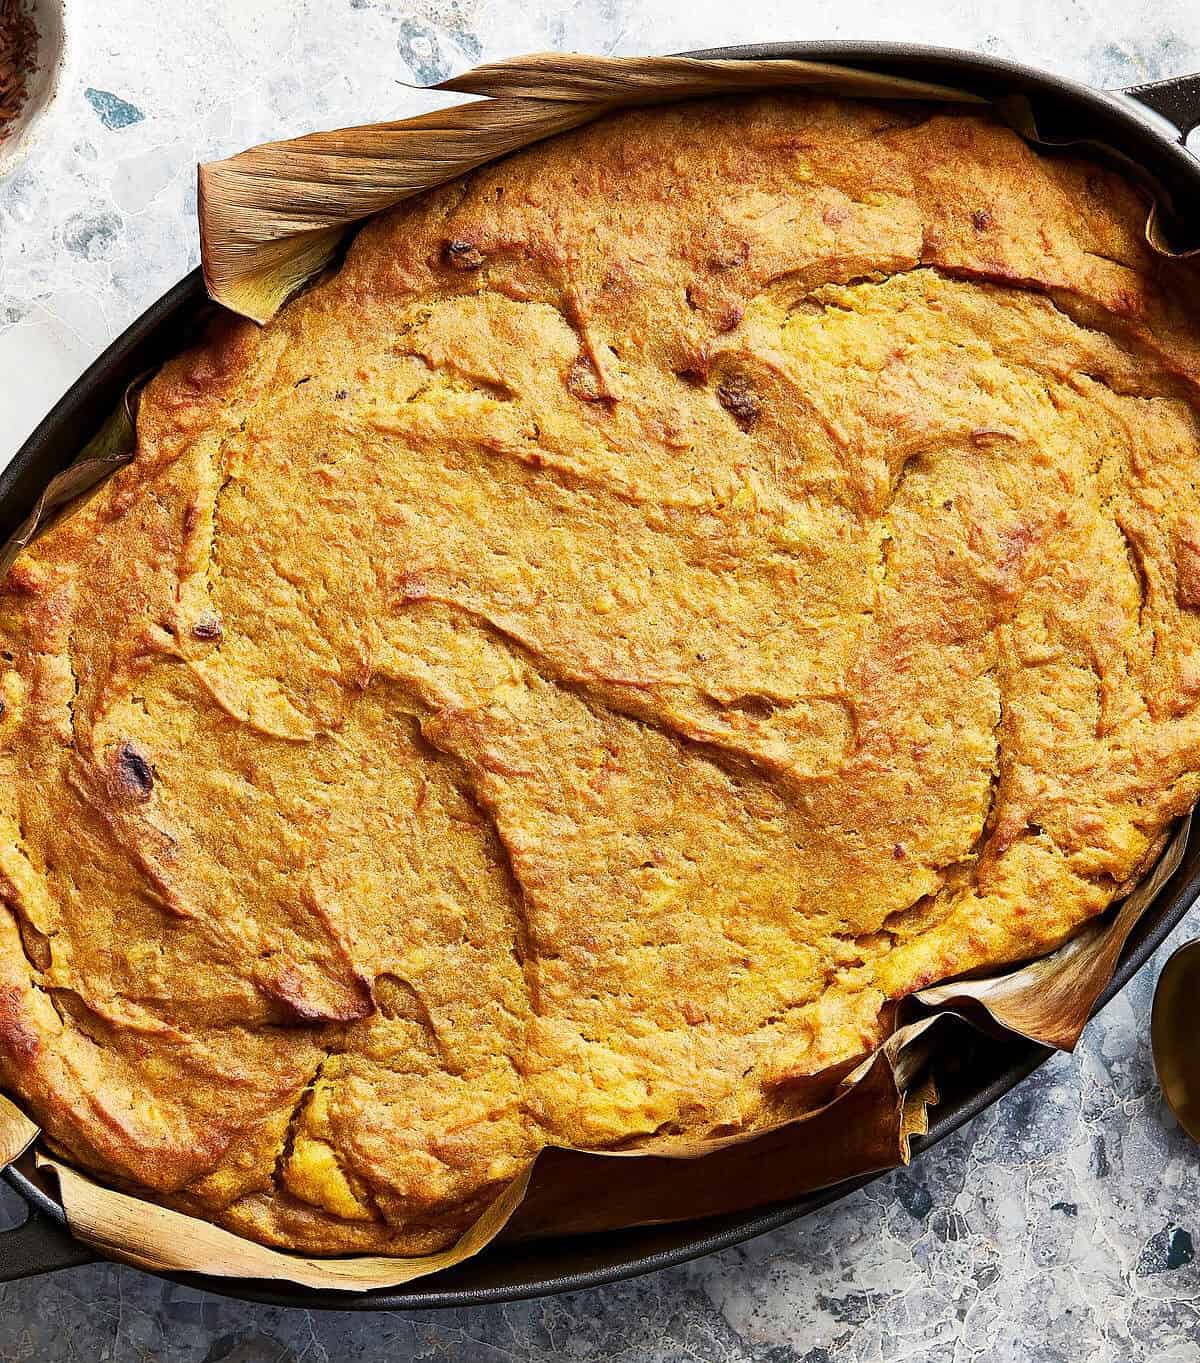  A mix of pumpkin, sweet potato, and creamy coconut milk make this the perfect fall dessert.